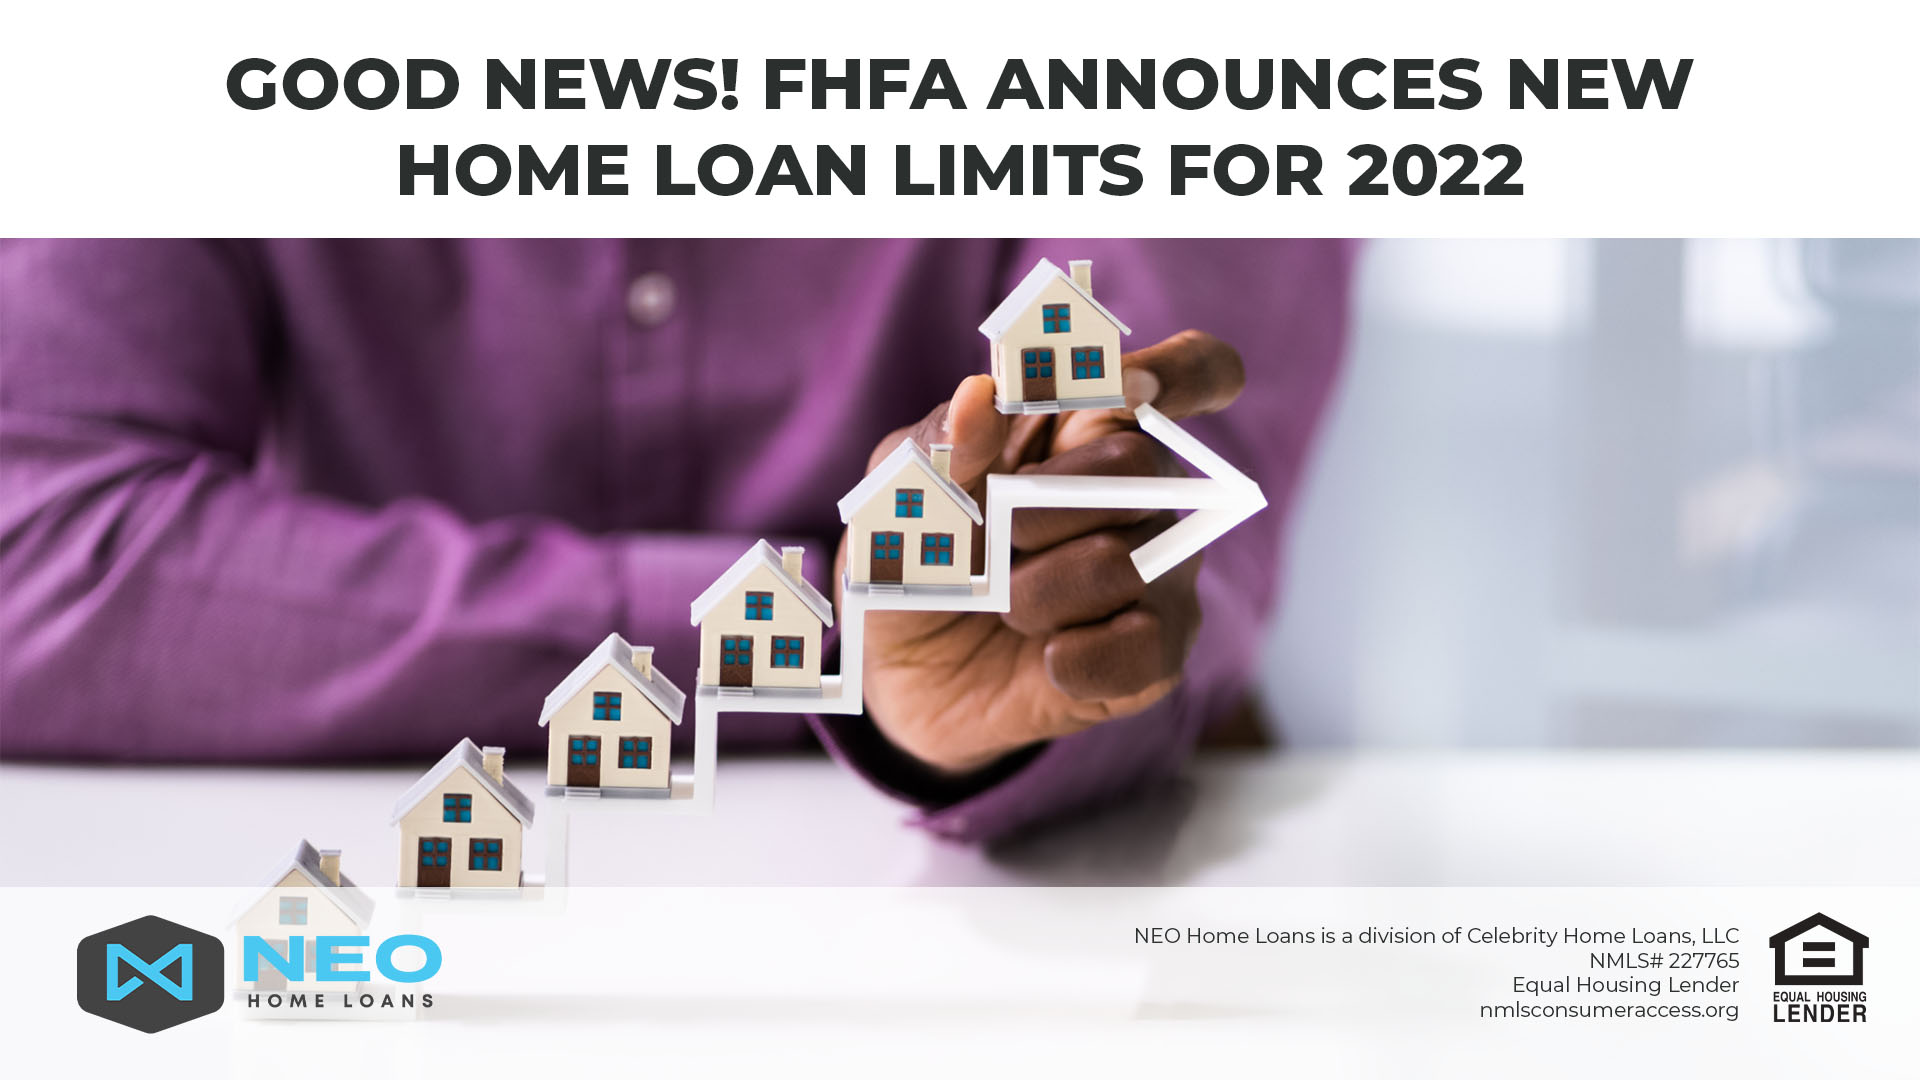 Good News! FHFA Announces New Home Loan Limits For 2022